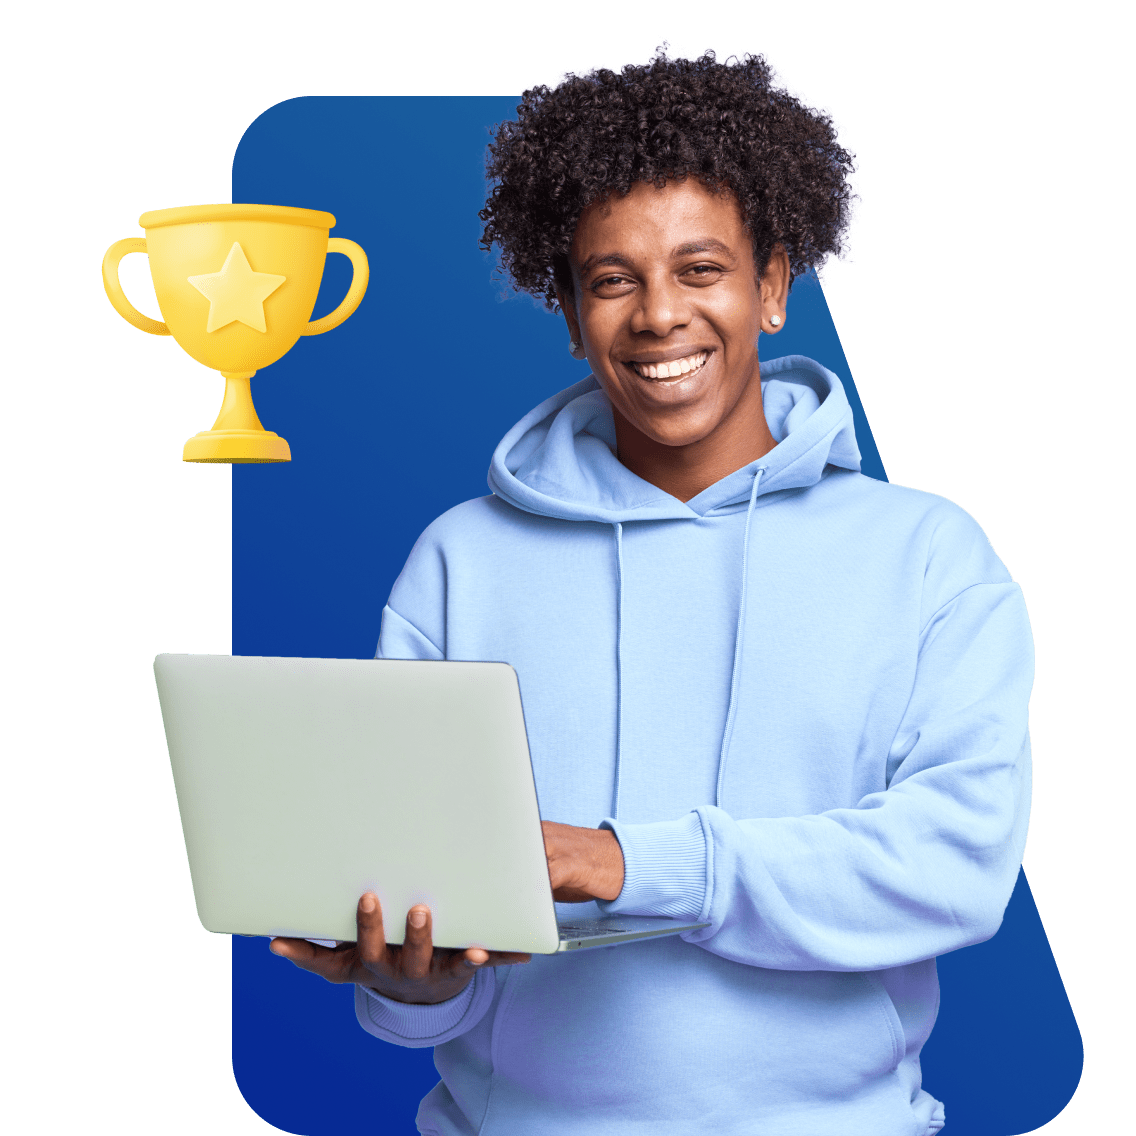 Dual Enrollment Courses for High School Students image 2 (name 1 Young Man Laptop Blue Hoodie Award 2)